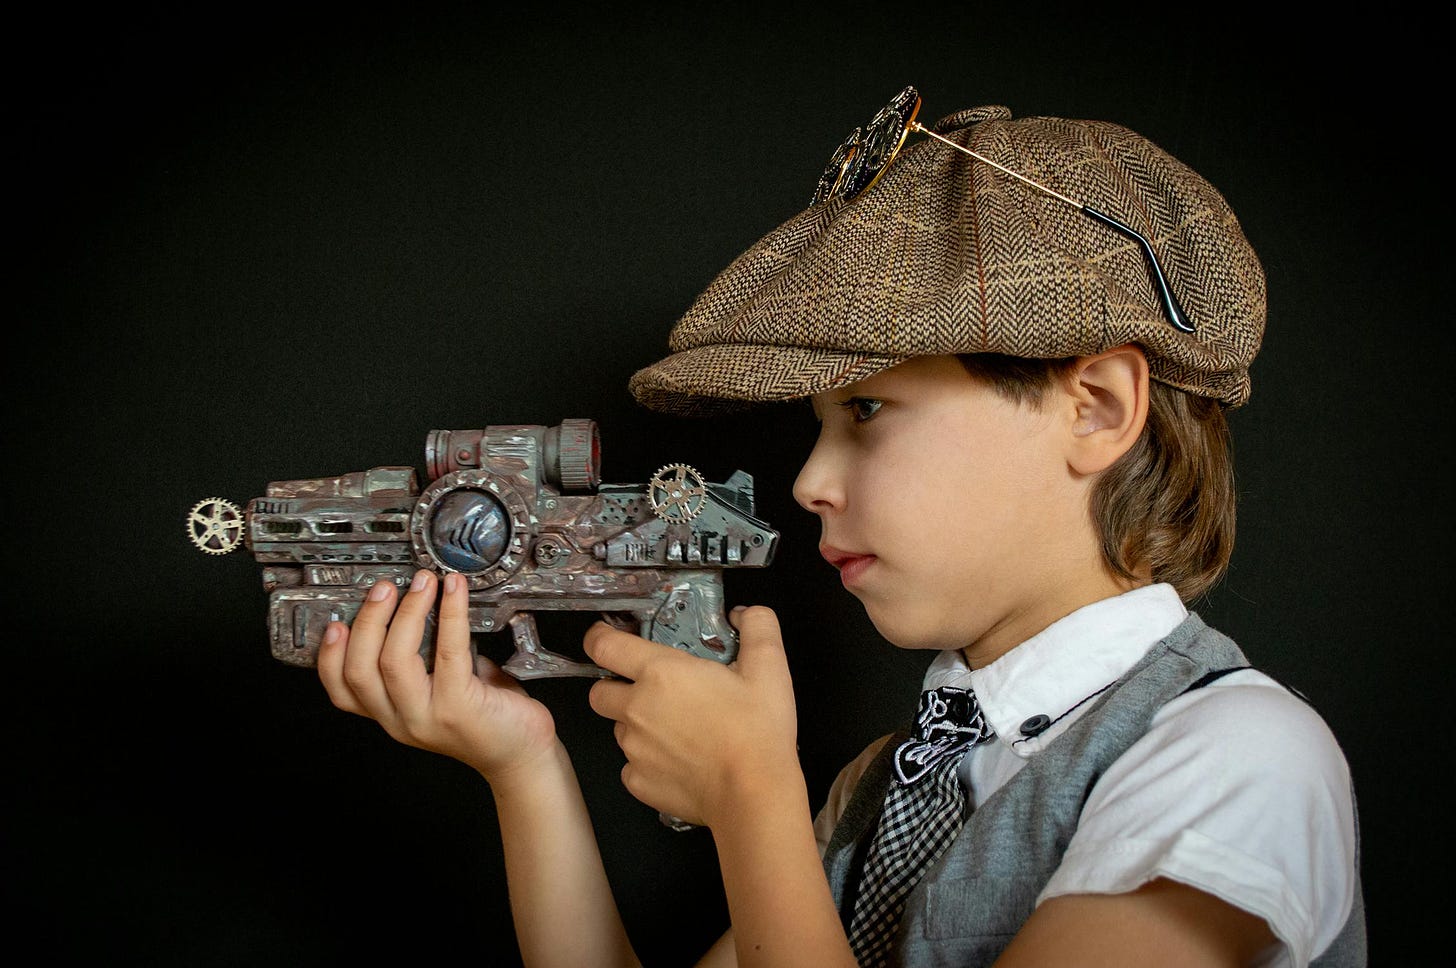 Child in a cap holds an old toy gun